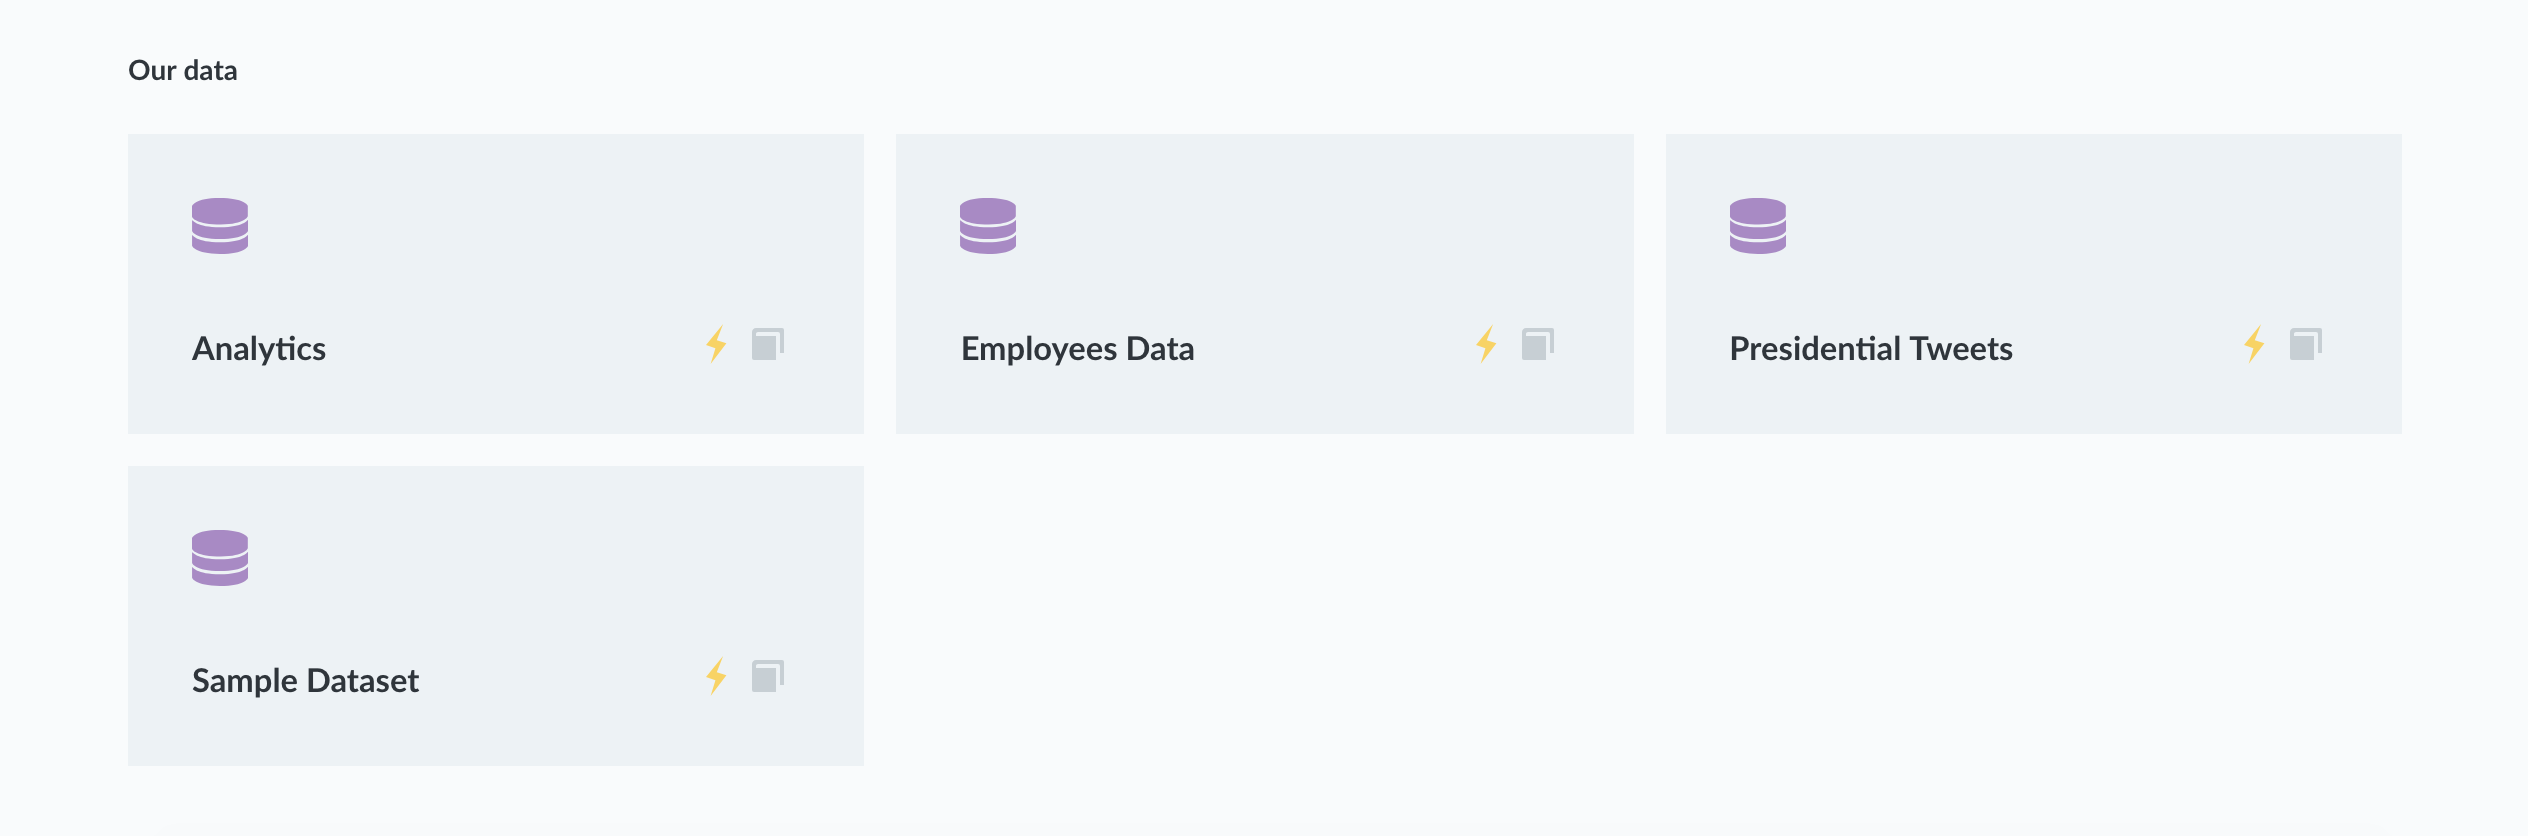 The Browse Data section will show you the databases connected to your Metabase, including the Sample Database that ships with Metabase.